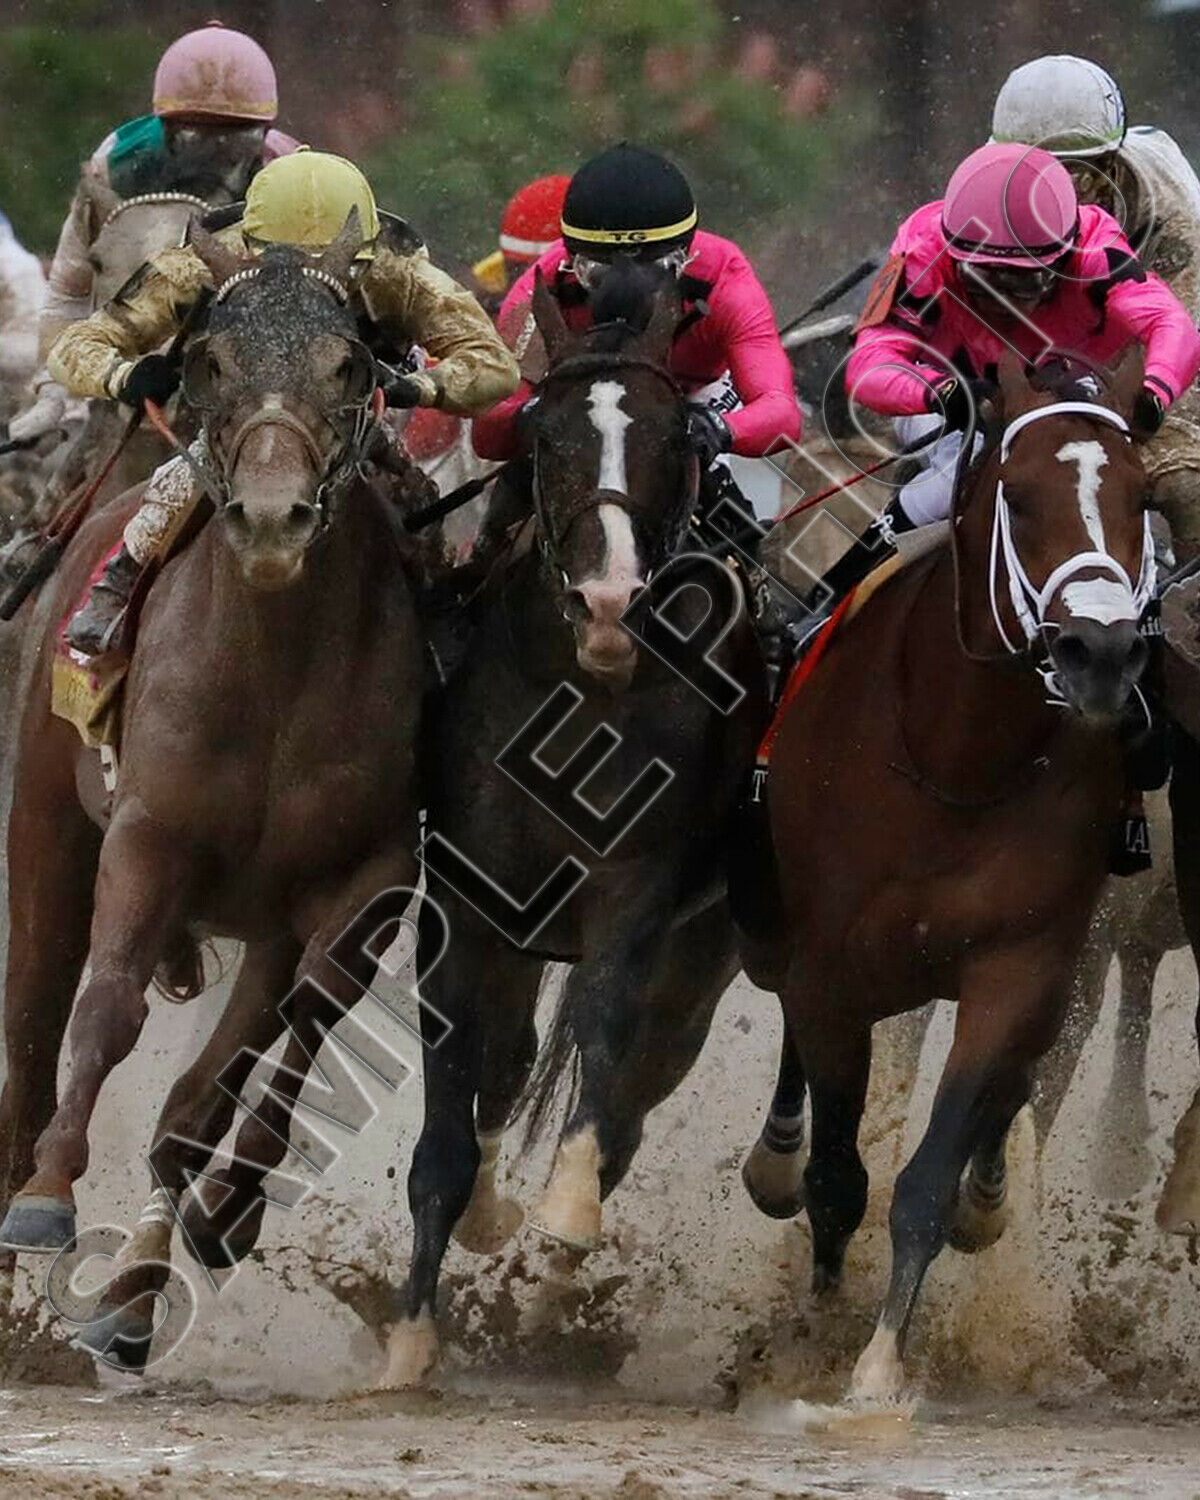 2019 KENTUCKY DERBY COUNTRY HOUSE & MAXIMUM SECURITY BATTLE FOR LEAD 8X10 PHOTO